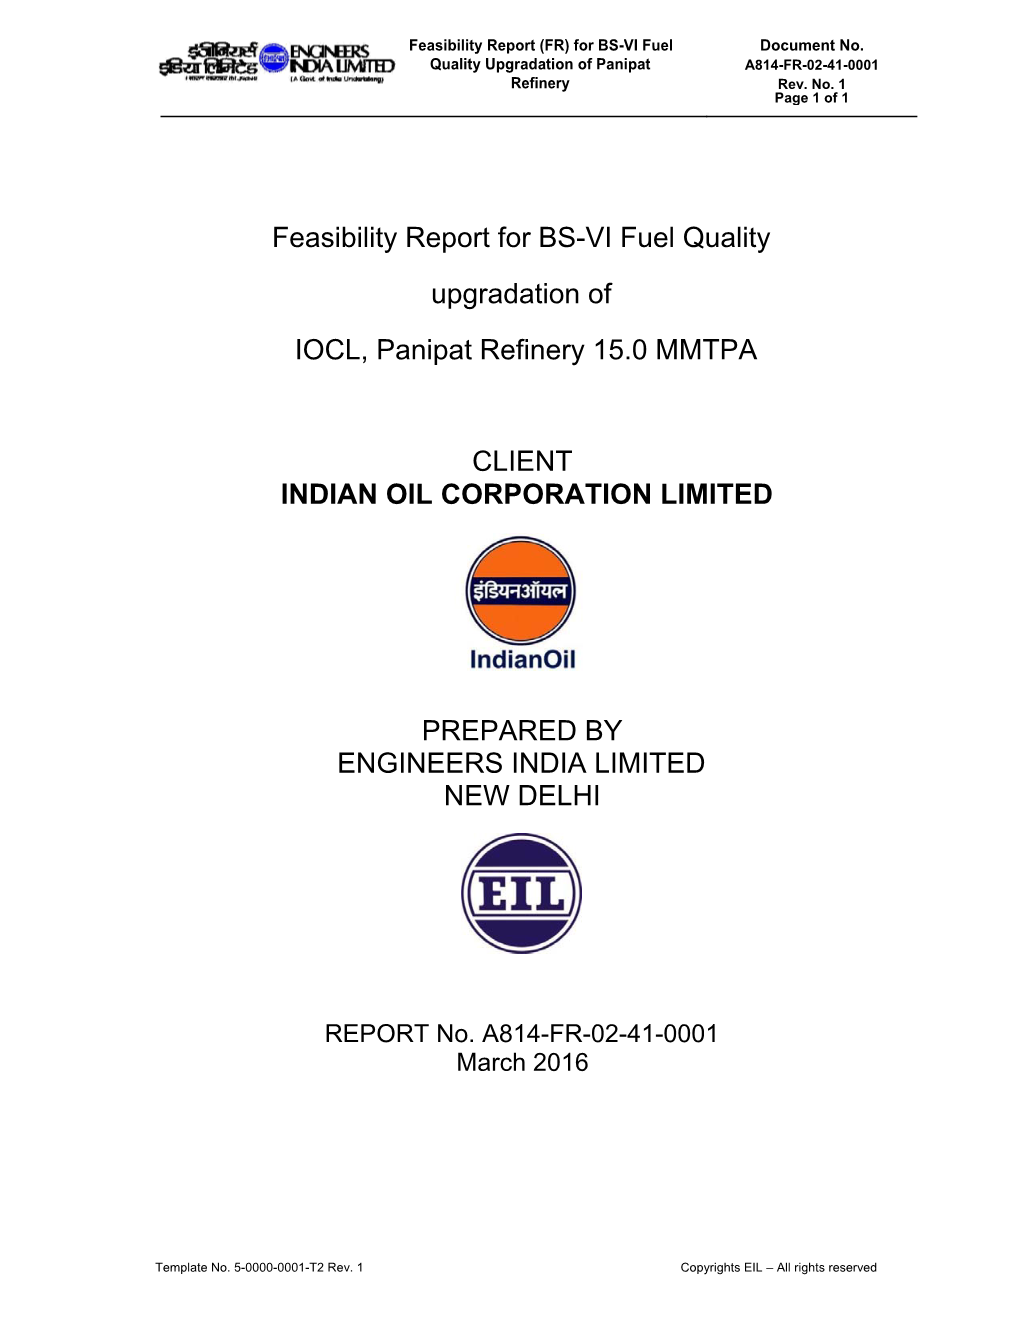 Feasibility Report for BS-VI Fuel Quality Upgradation of IOCL